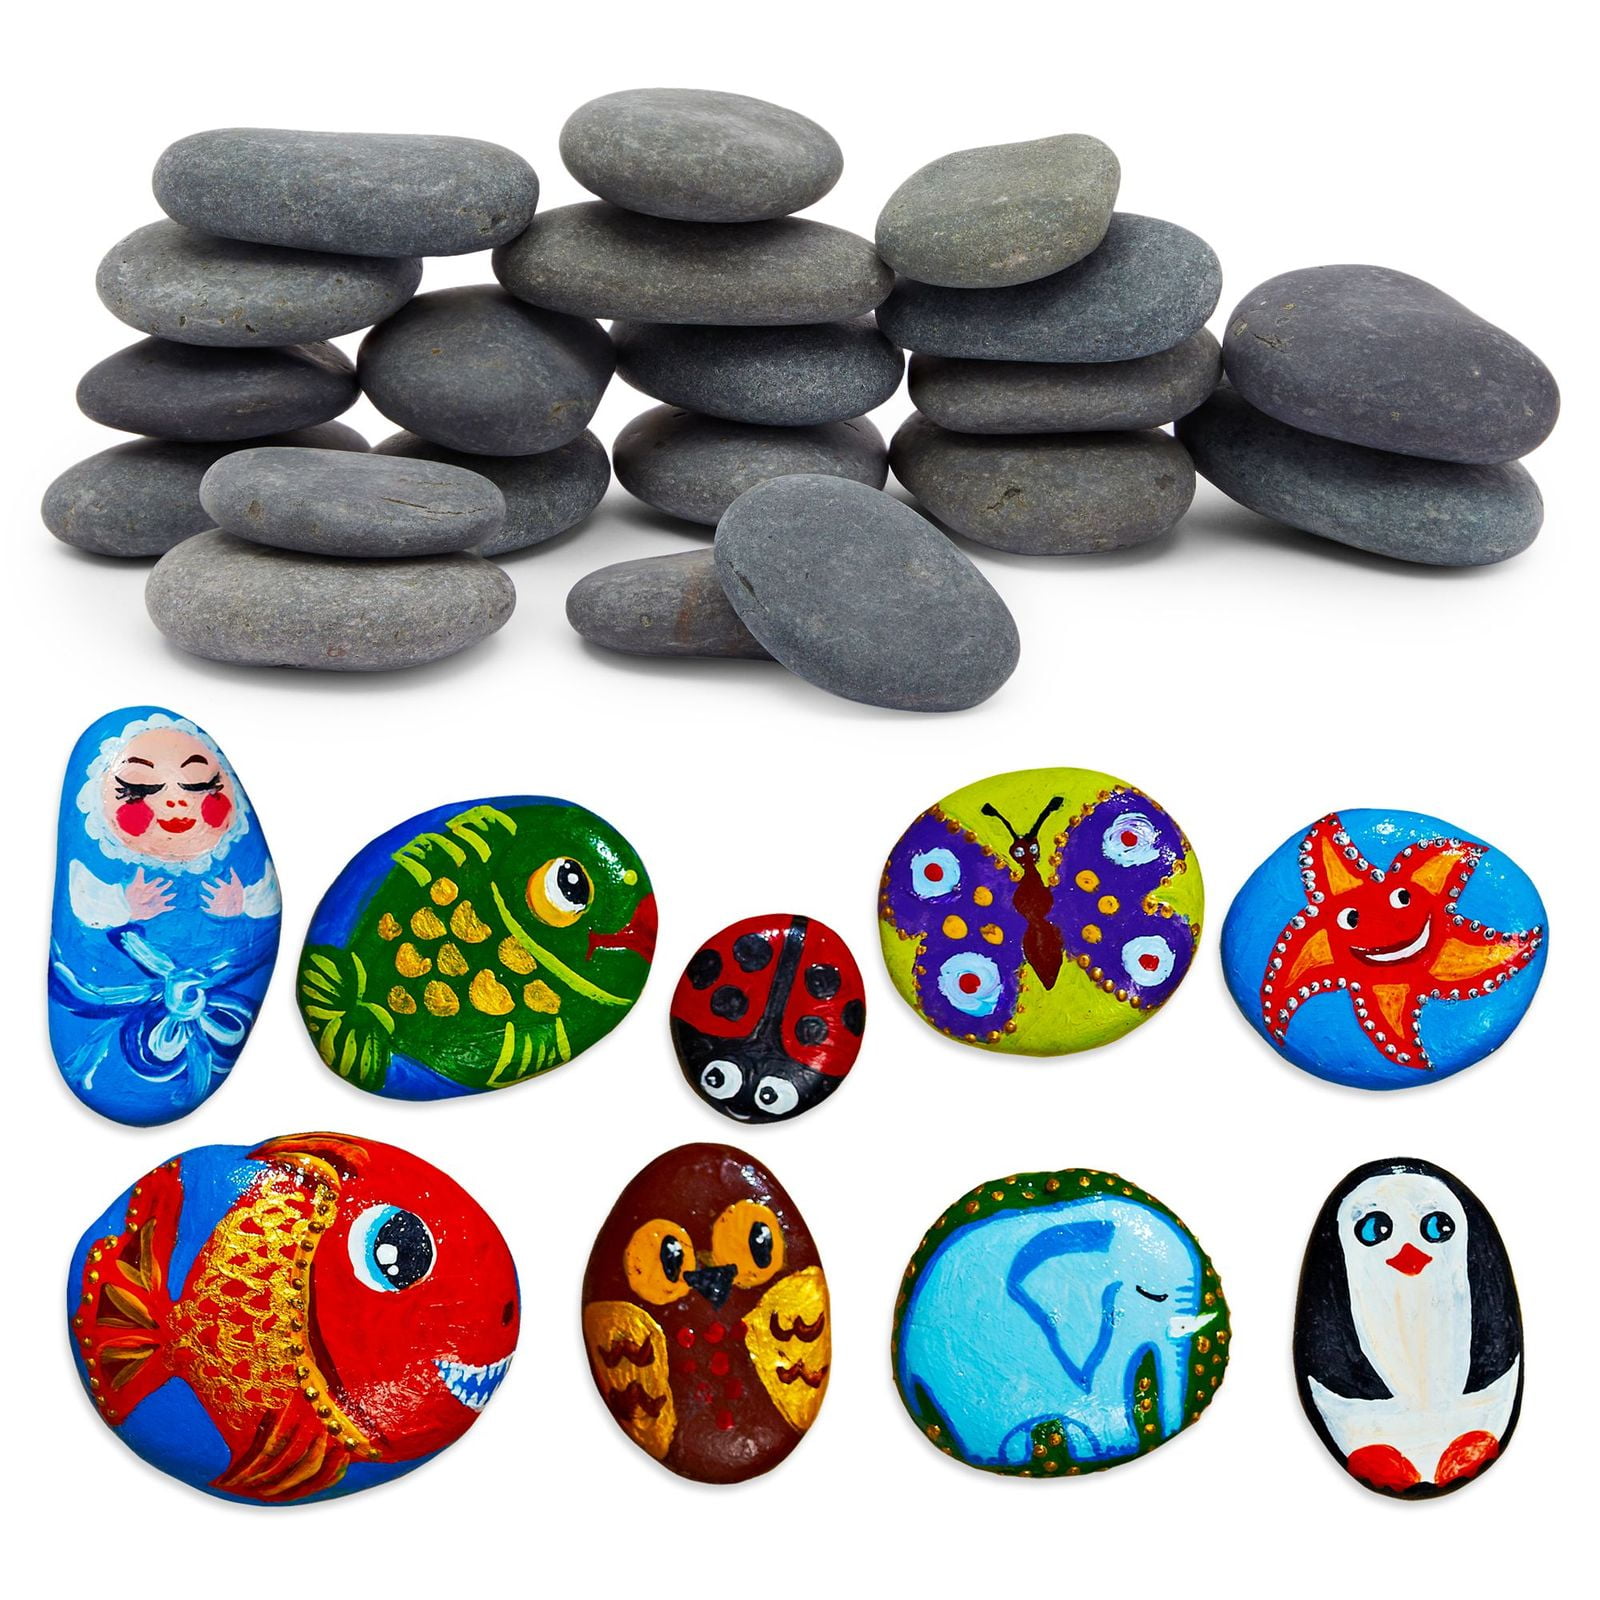 5-7cm&7-10cm Crafts Paint Stones for Kids Arts Smooth Rocks Painting Painting DIY Crafts Natural River Stones 20 Pcs Rocks Painting Flat Stones for Painting Painting Rock Natural River Stone